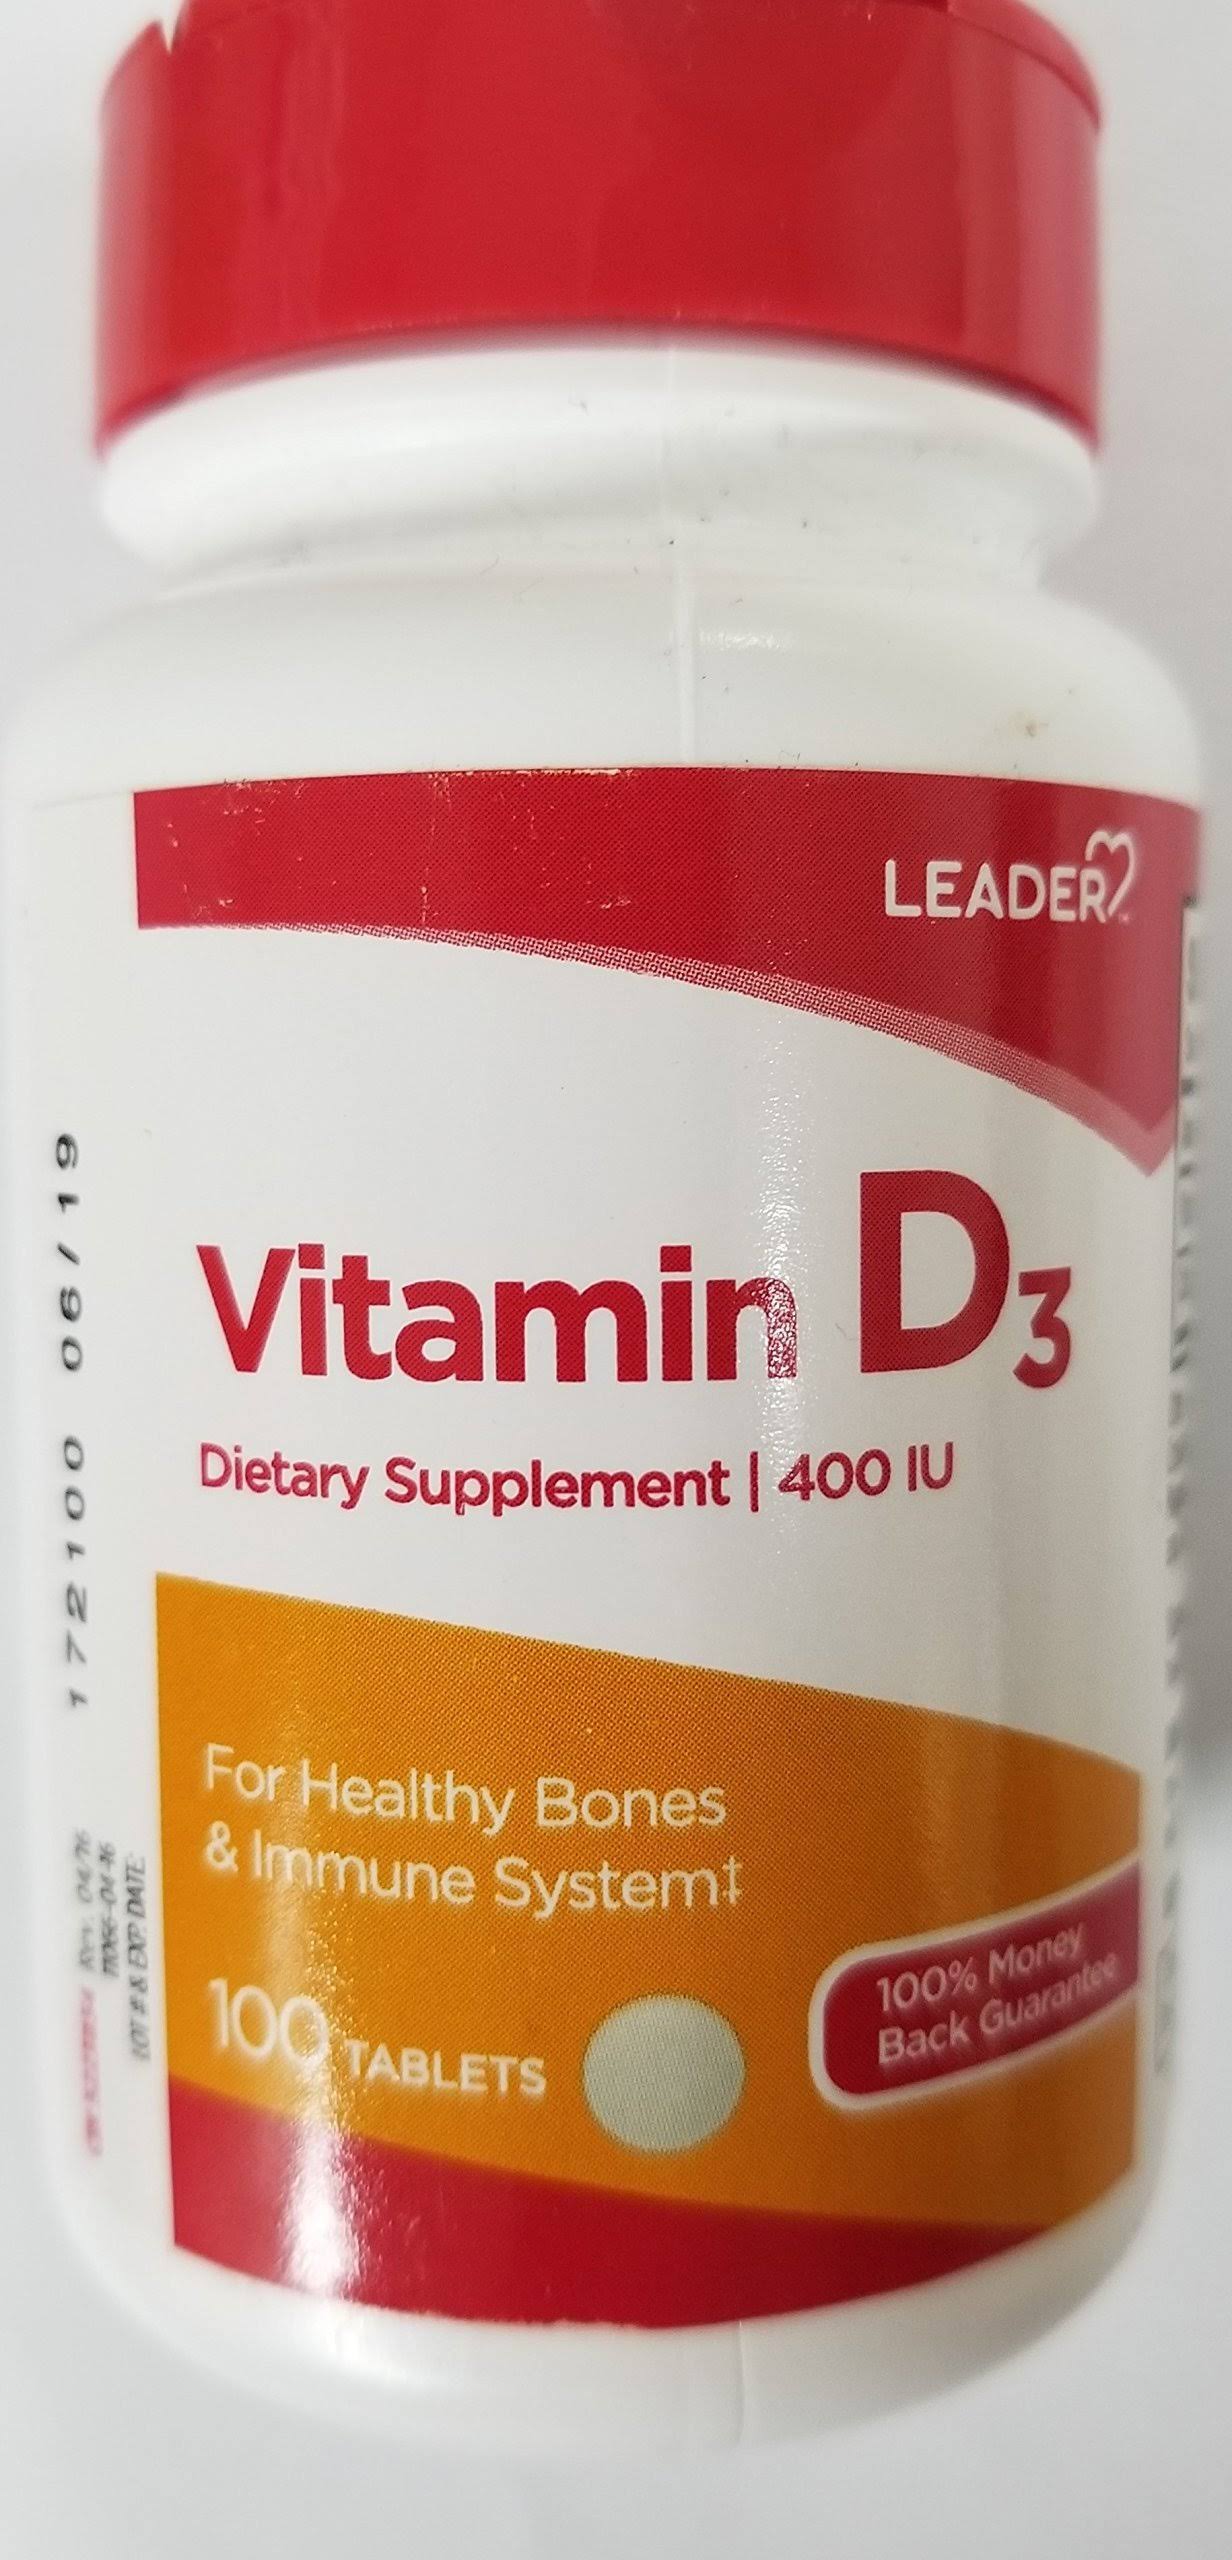 Leader D Dietary Supplement - 400IU, 100 Tablets